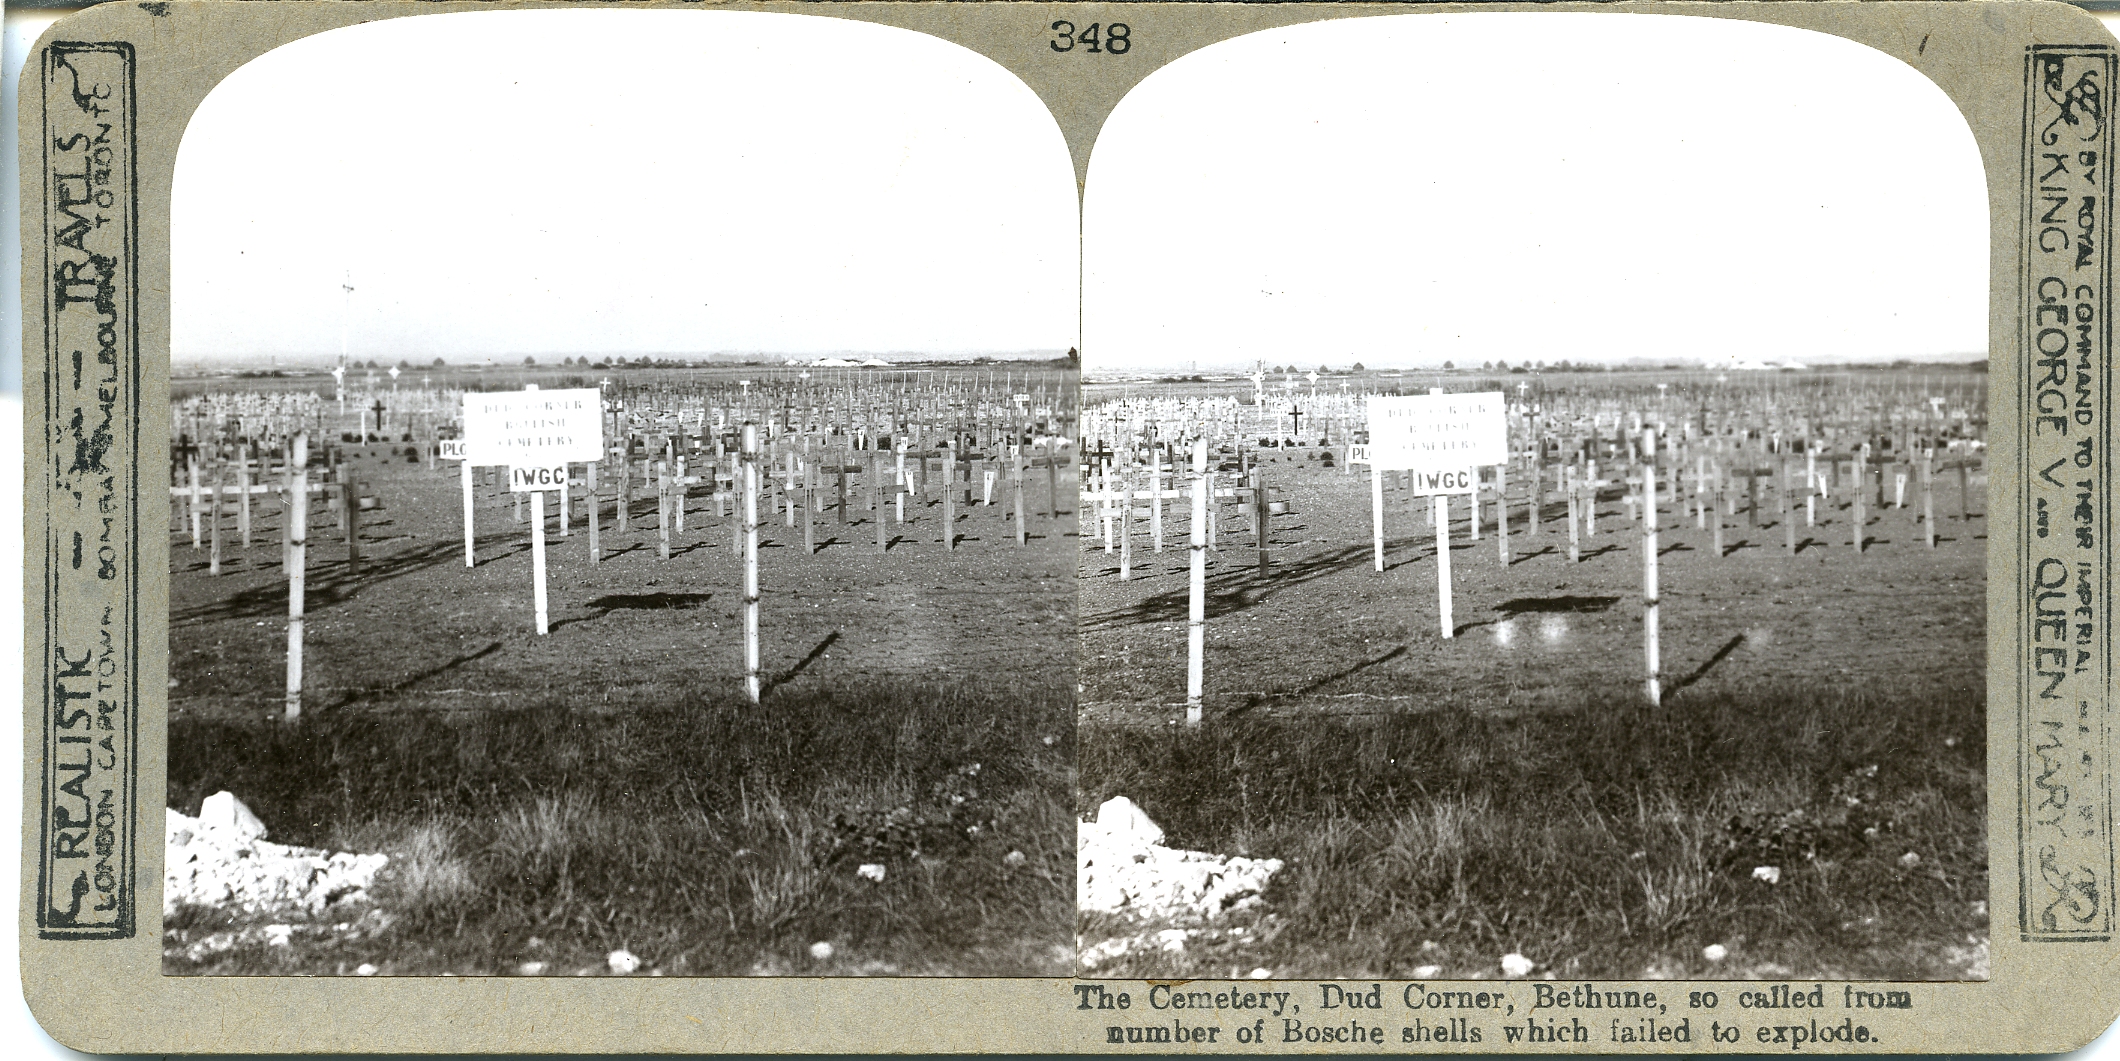 The Cemetery, Dud Corner, Bethune, so called from number of Bosche shells which failed to explode